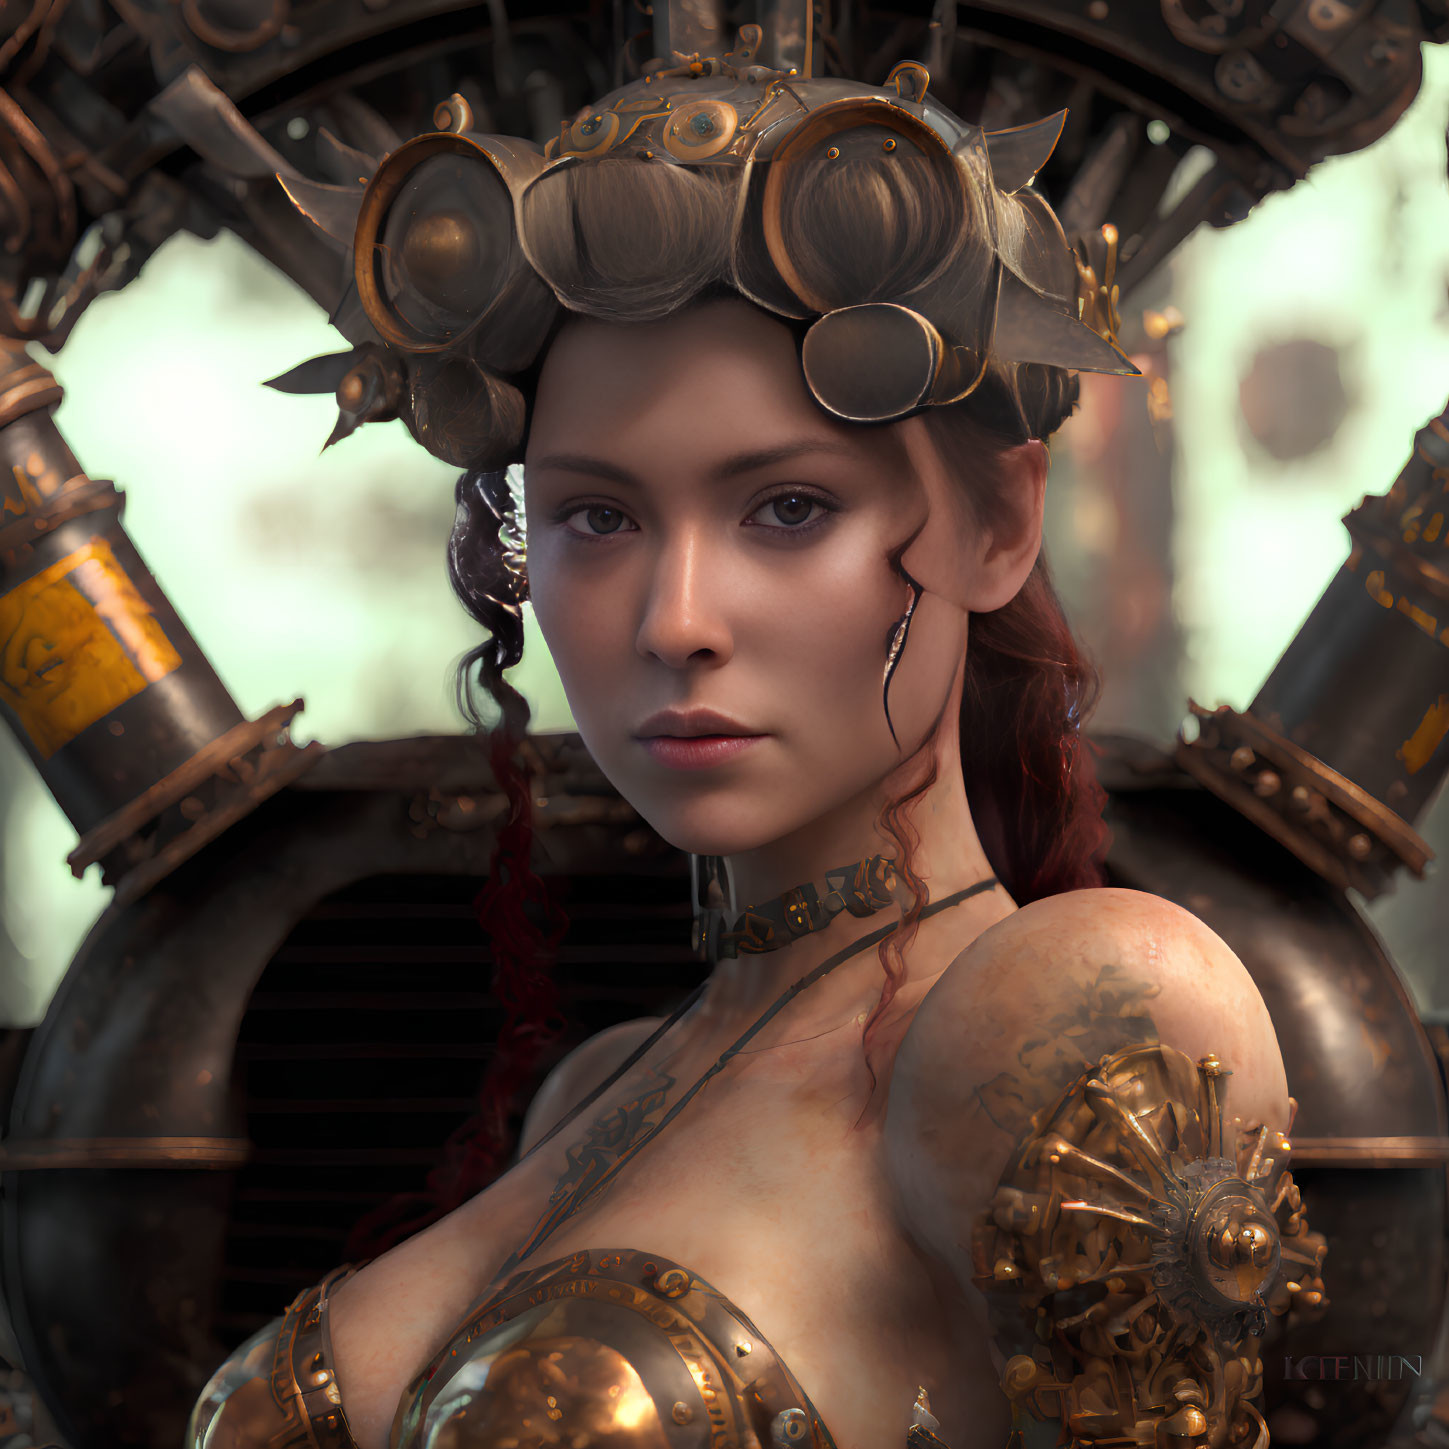 Detailed steampunk woman with mechanical arm and ornate headgear in industrial setting